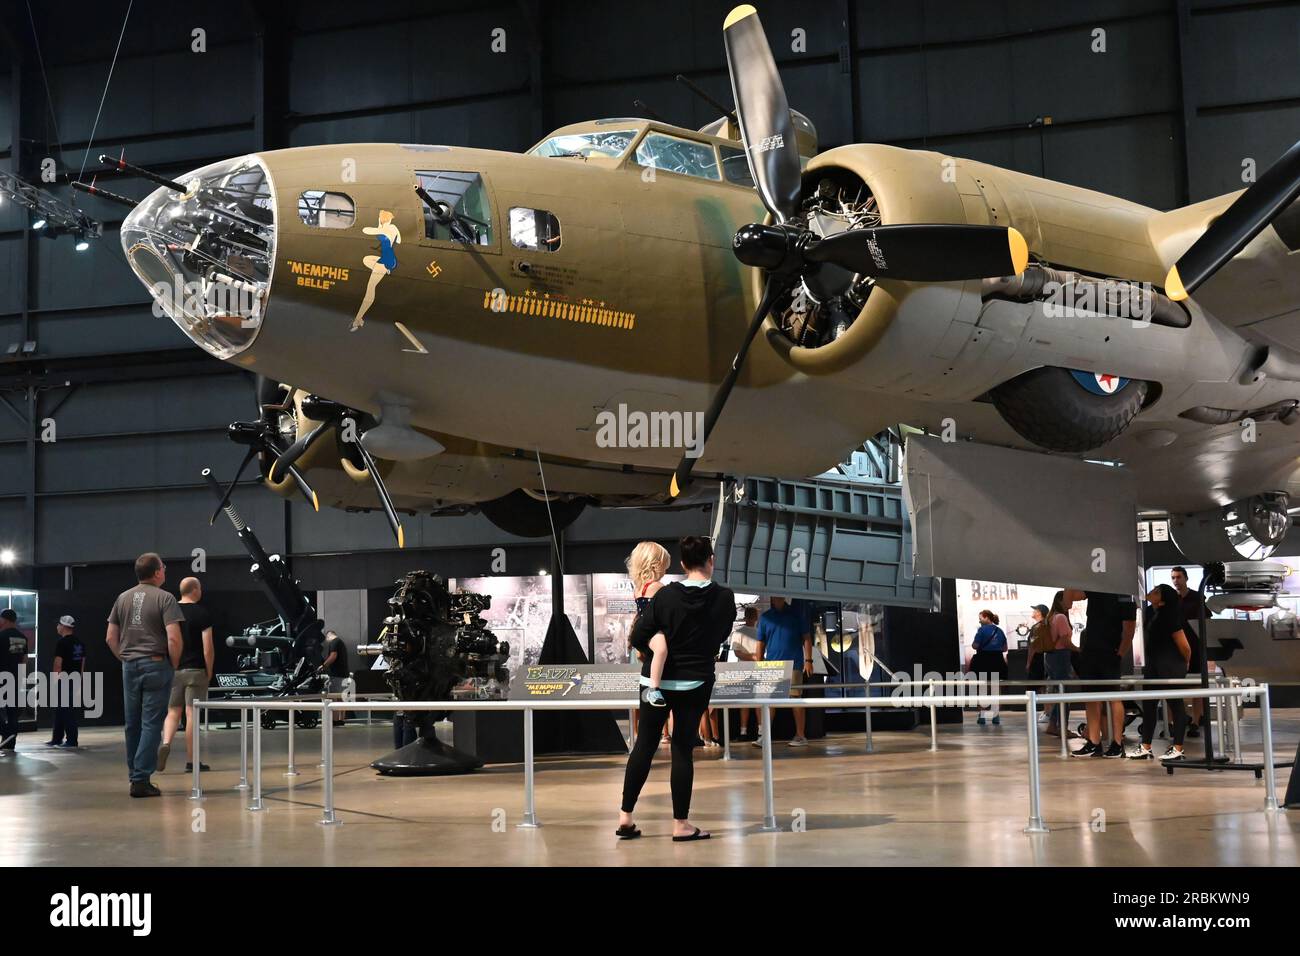 The Memphis Belle B17 Flying Fortress, famous for completing 25 combat missions in WWII, at the US Air Force National Museum in Dayton, Ohio Stock Photo